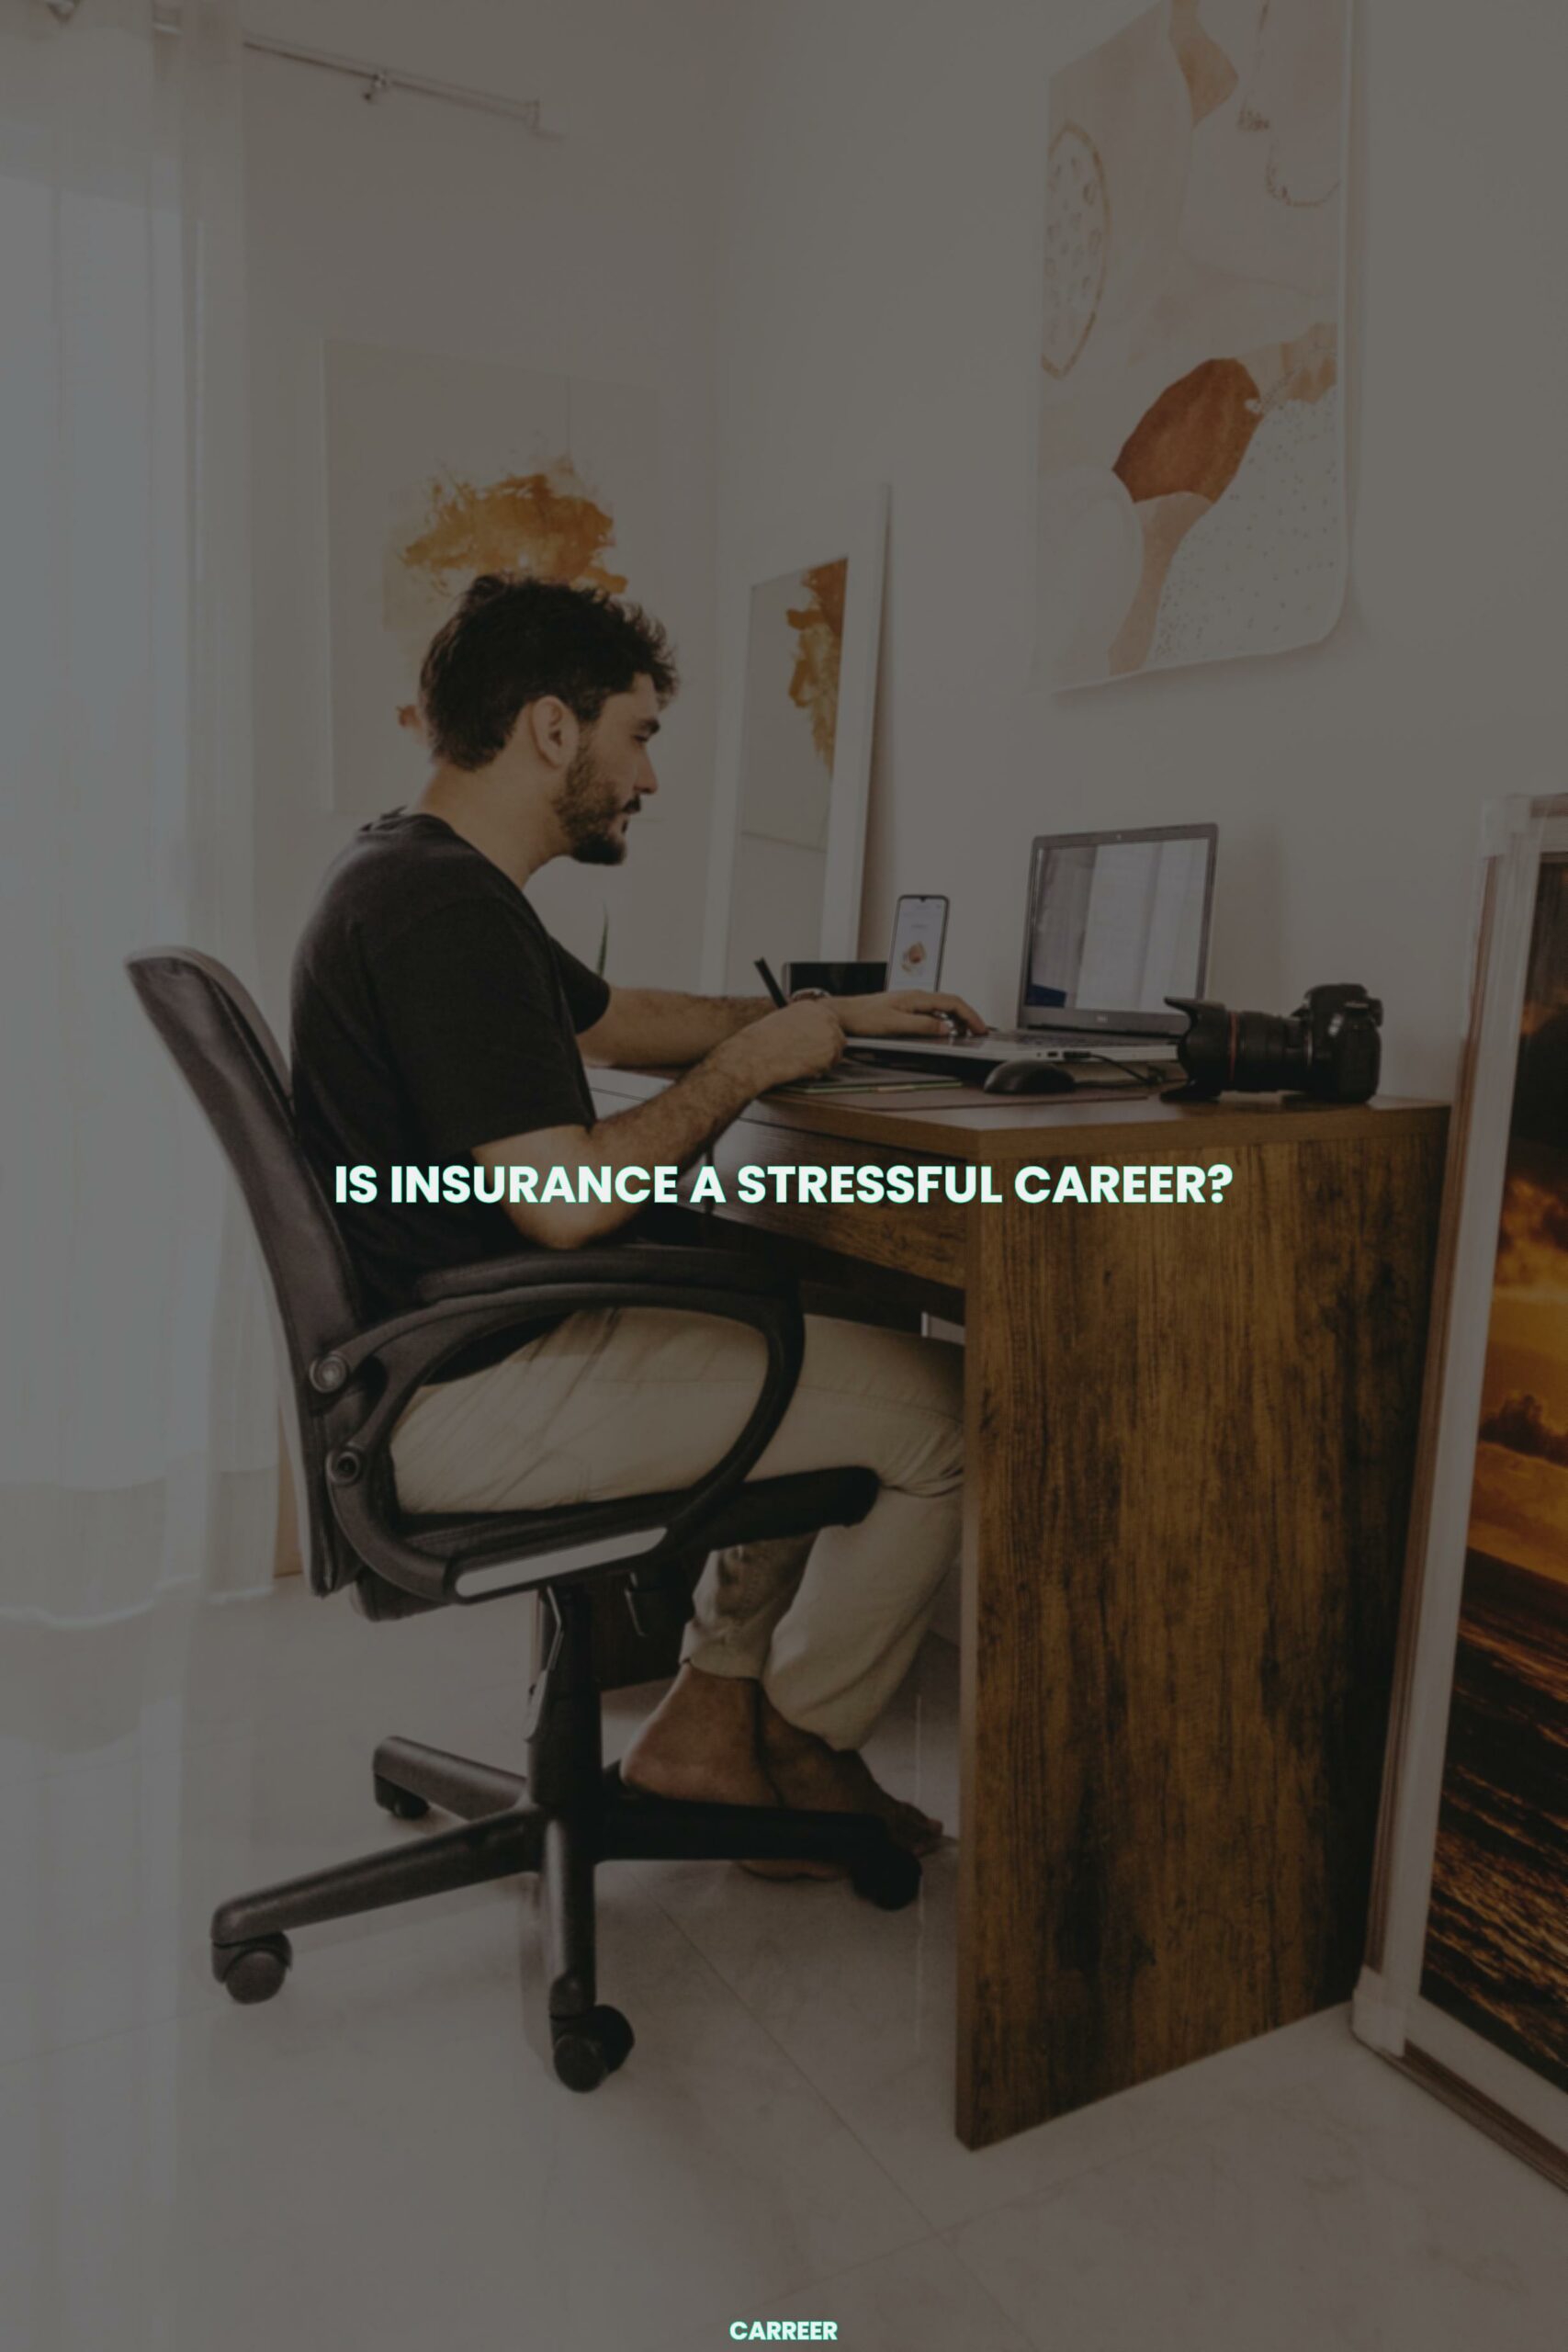 Is insurance a stressful career?